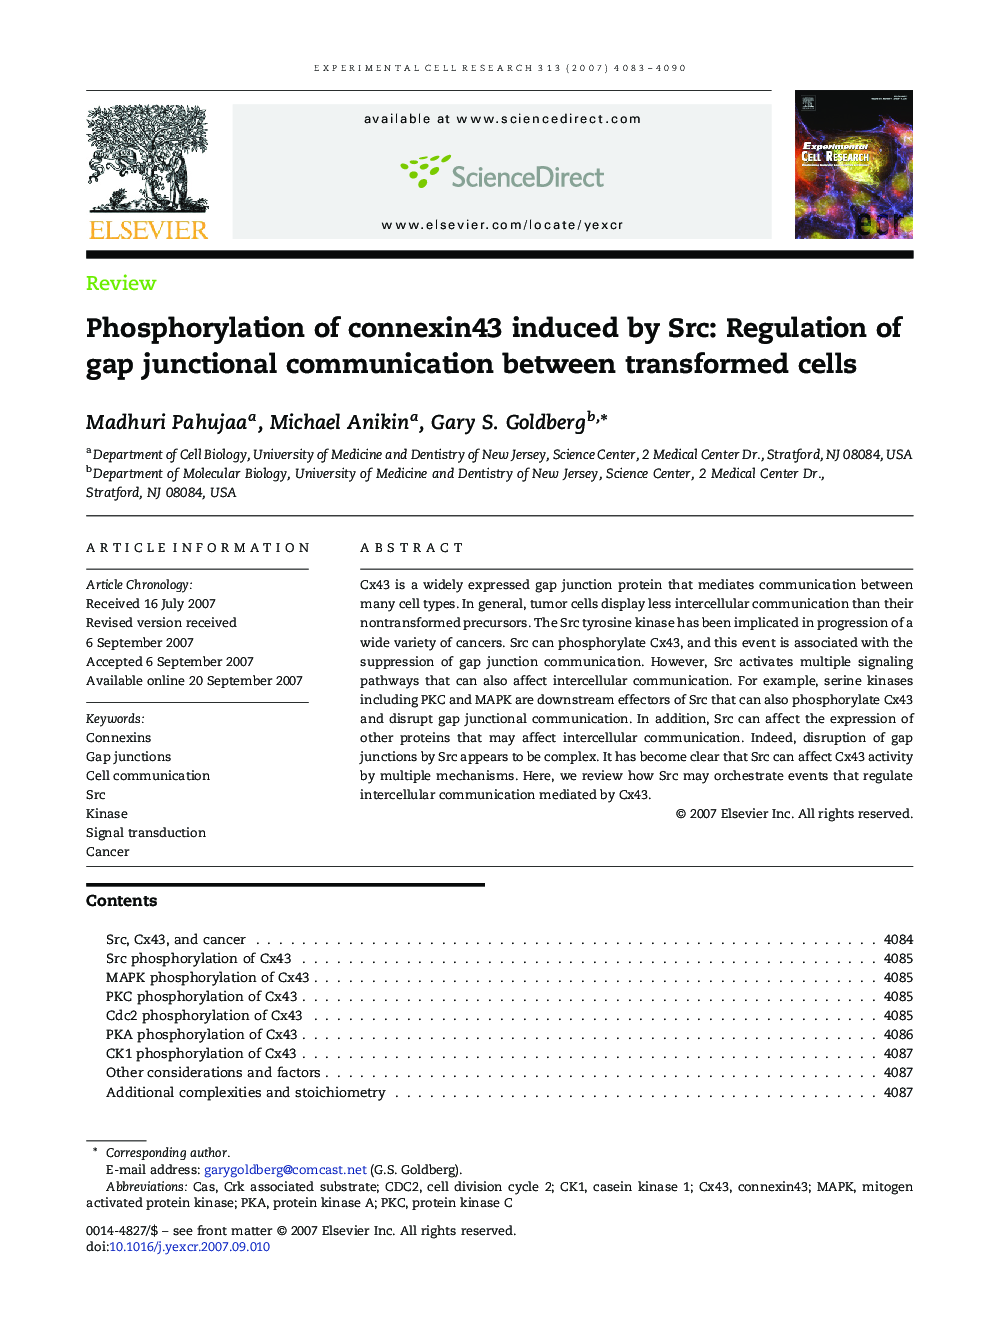 Phosphorylation of connexin43 induced by Src: Regulation of gap junctional communication between transformed cells